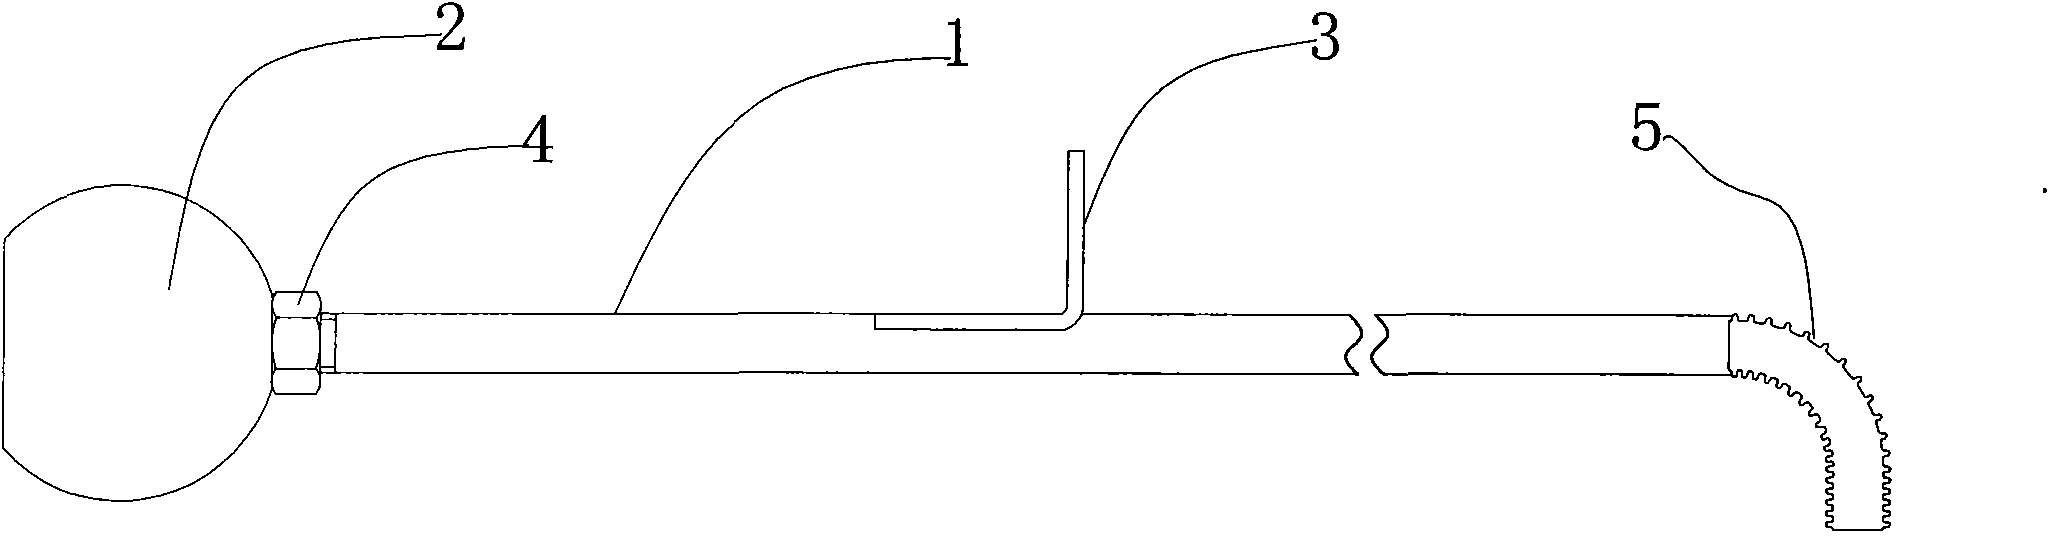 Dust suction apparatus of inner tank of low-temperature storage tank